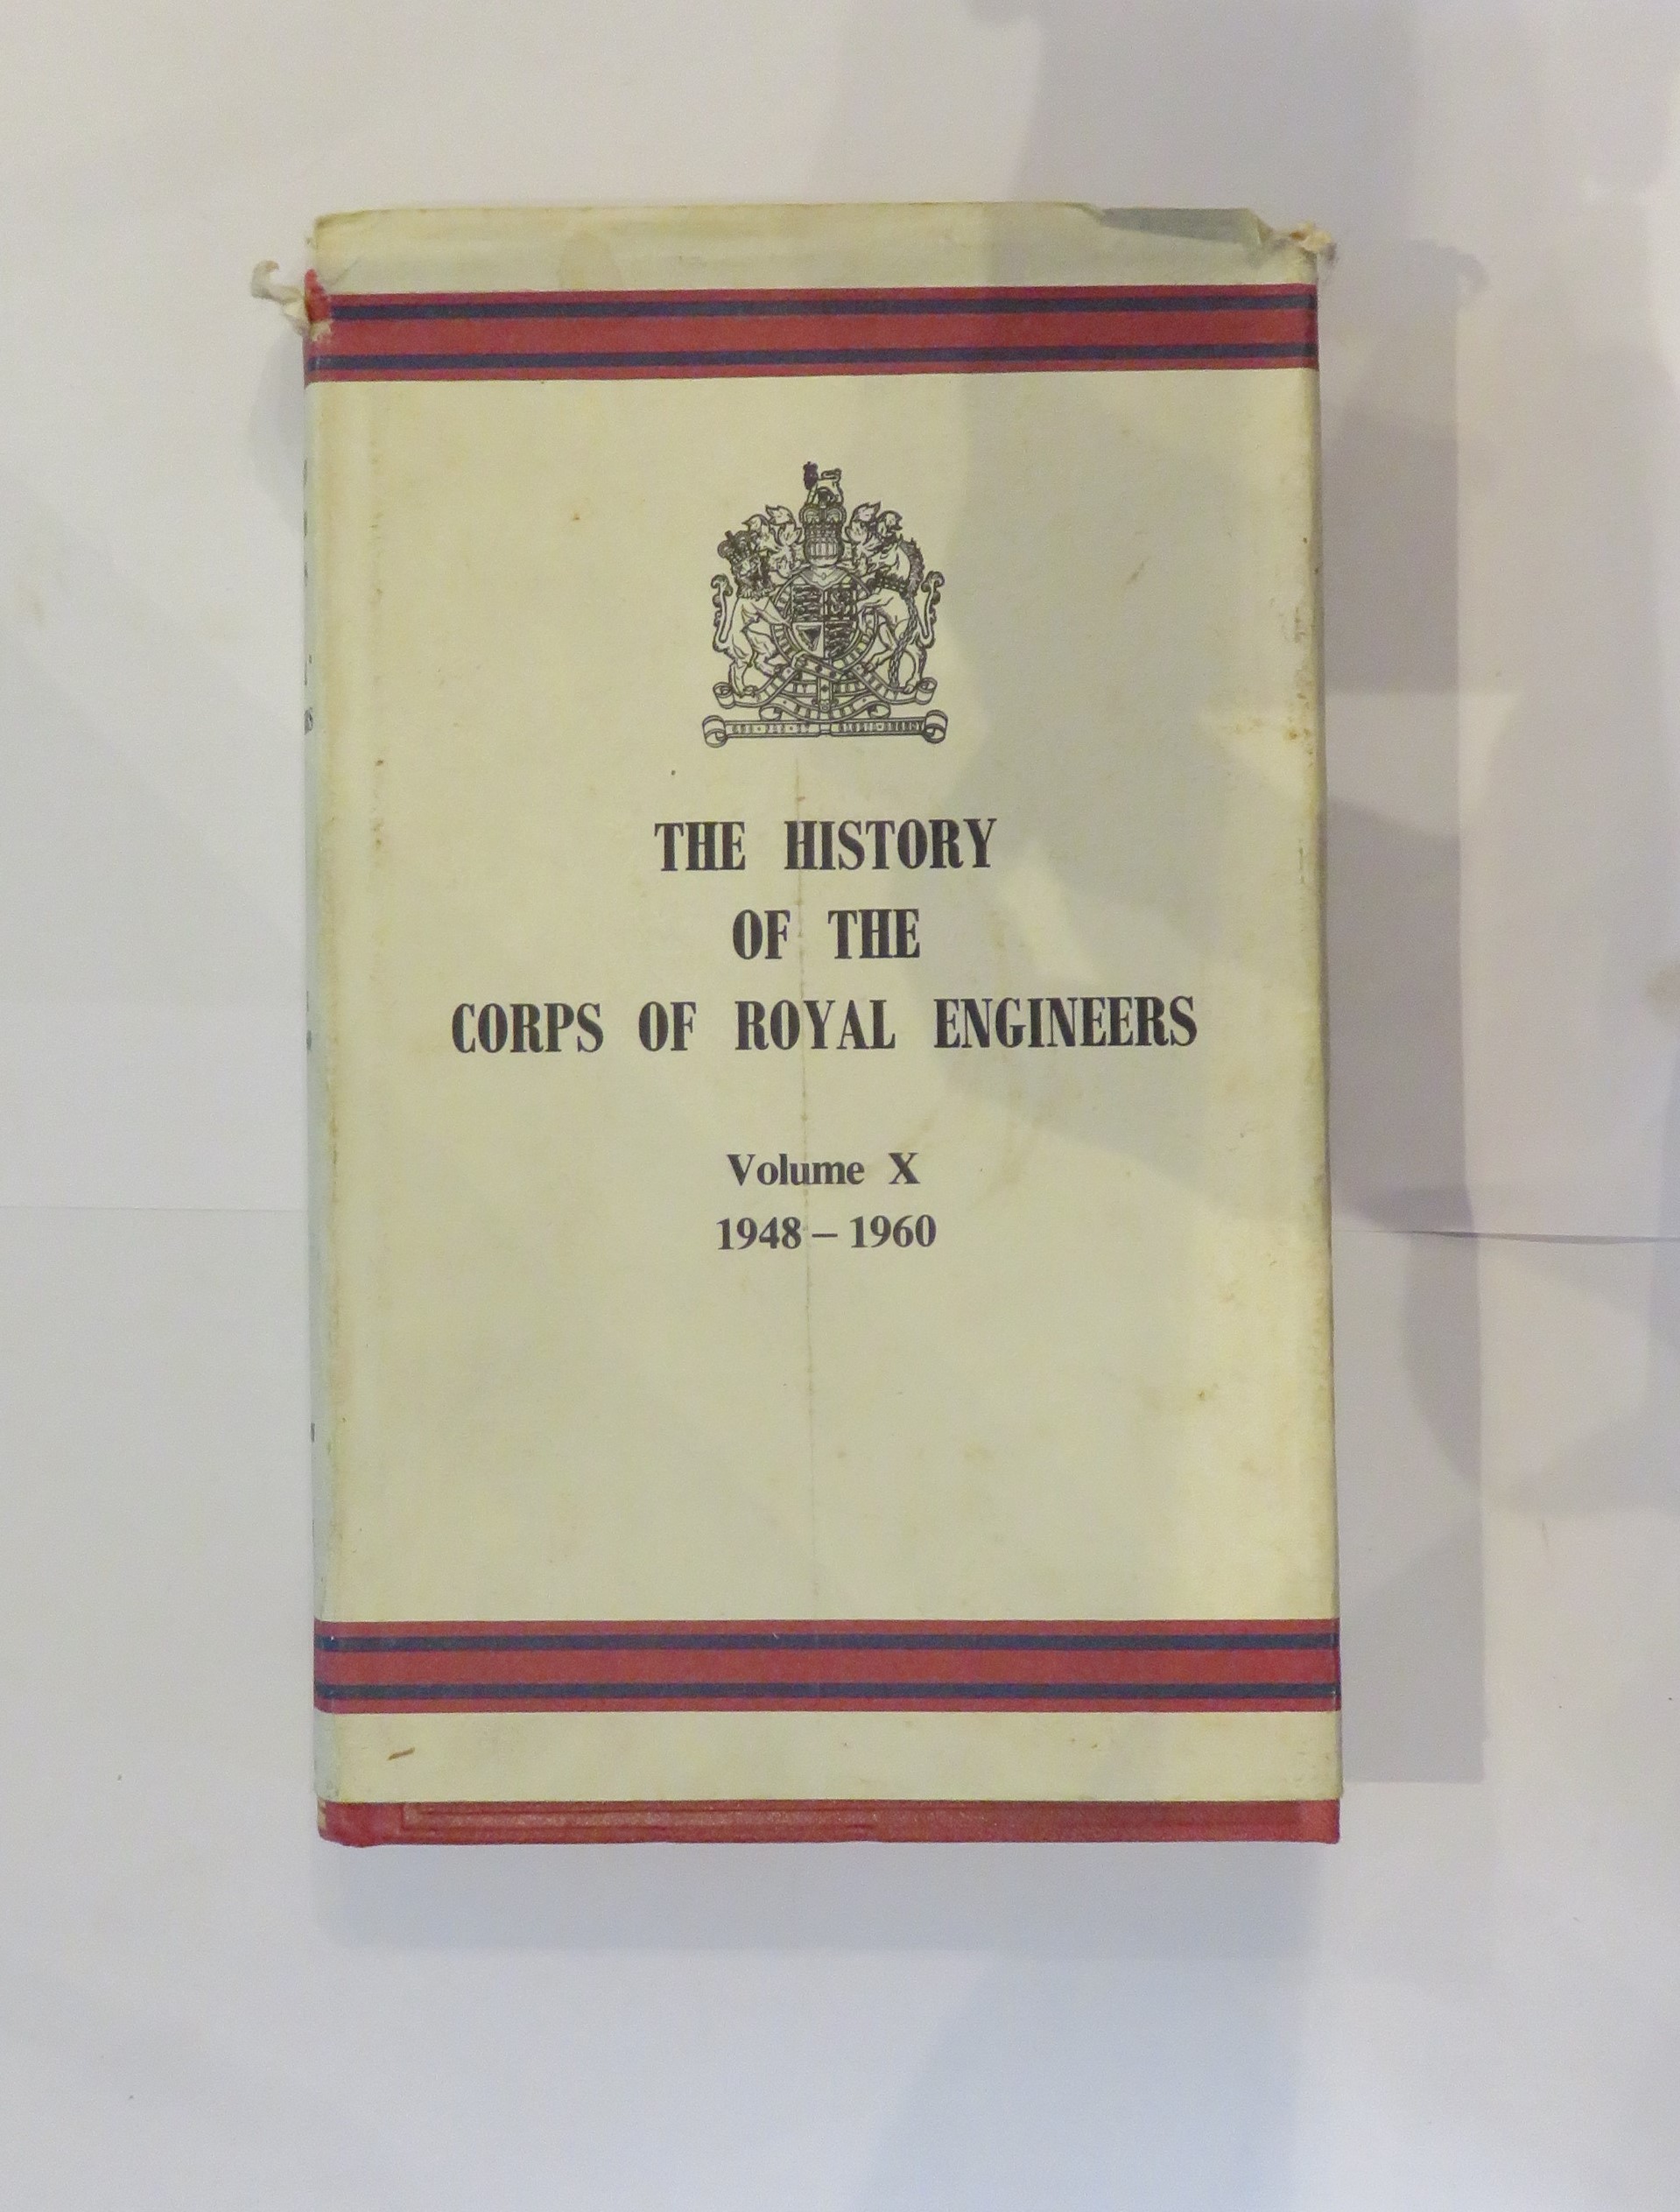 The History of the Corps of Royal Engineers Volume X 1948-1960